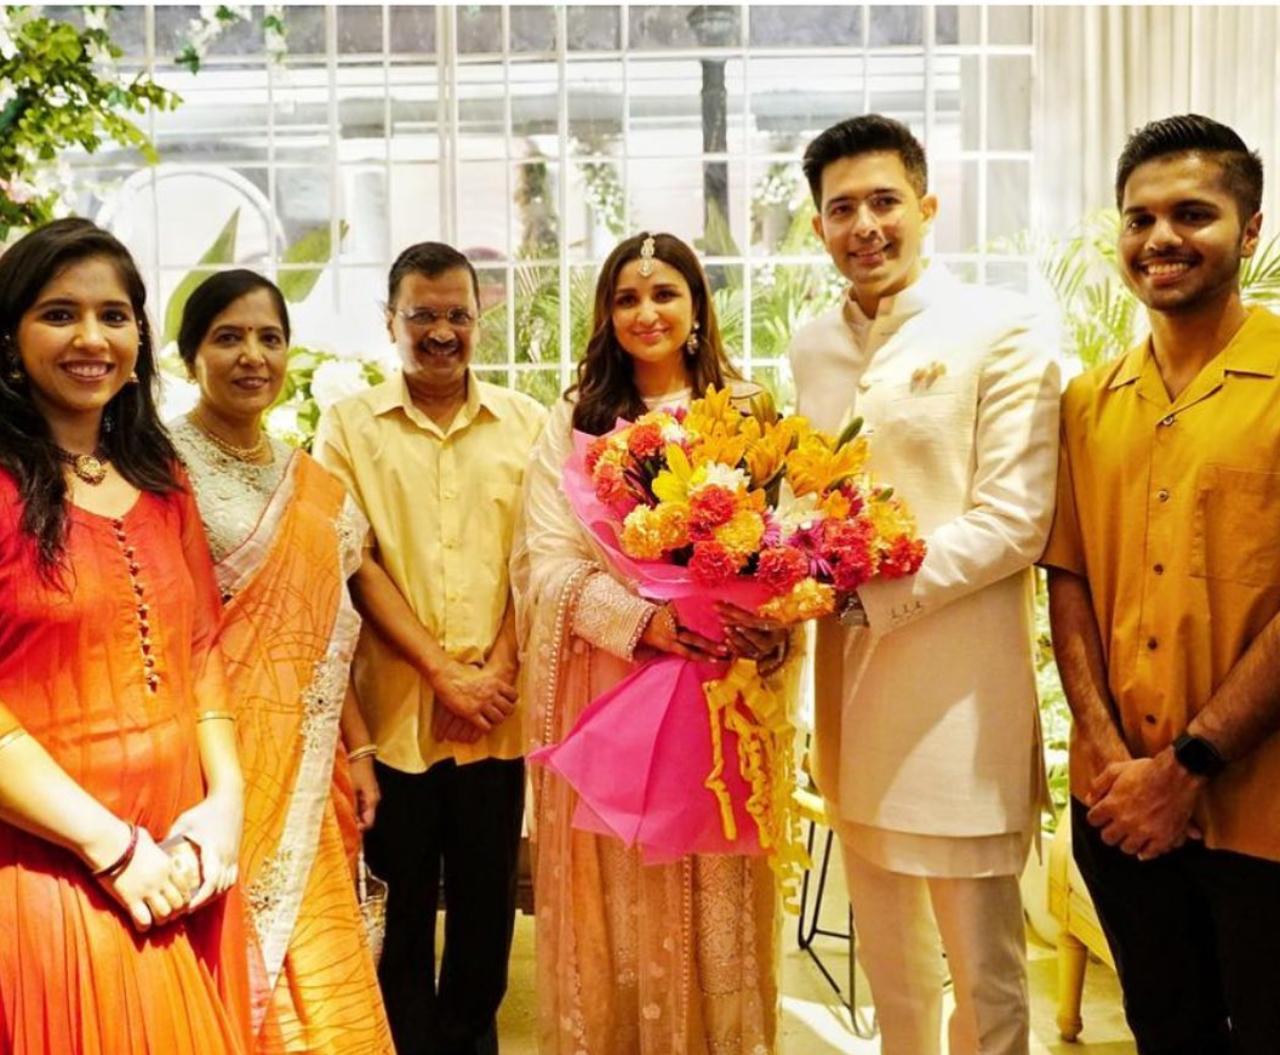 Kejriwal also shared a picture of the newly engaged couple. He attended the ceremony along with his wife